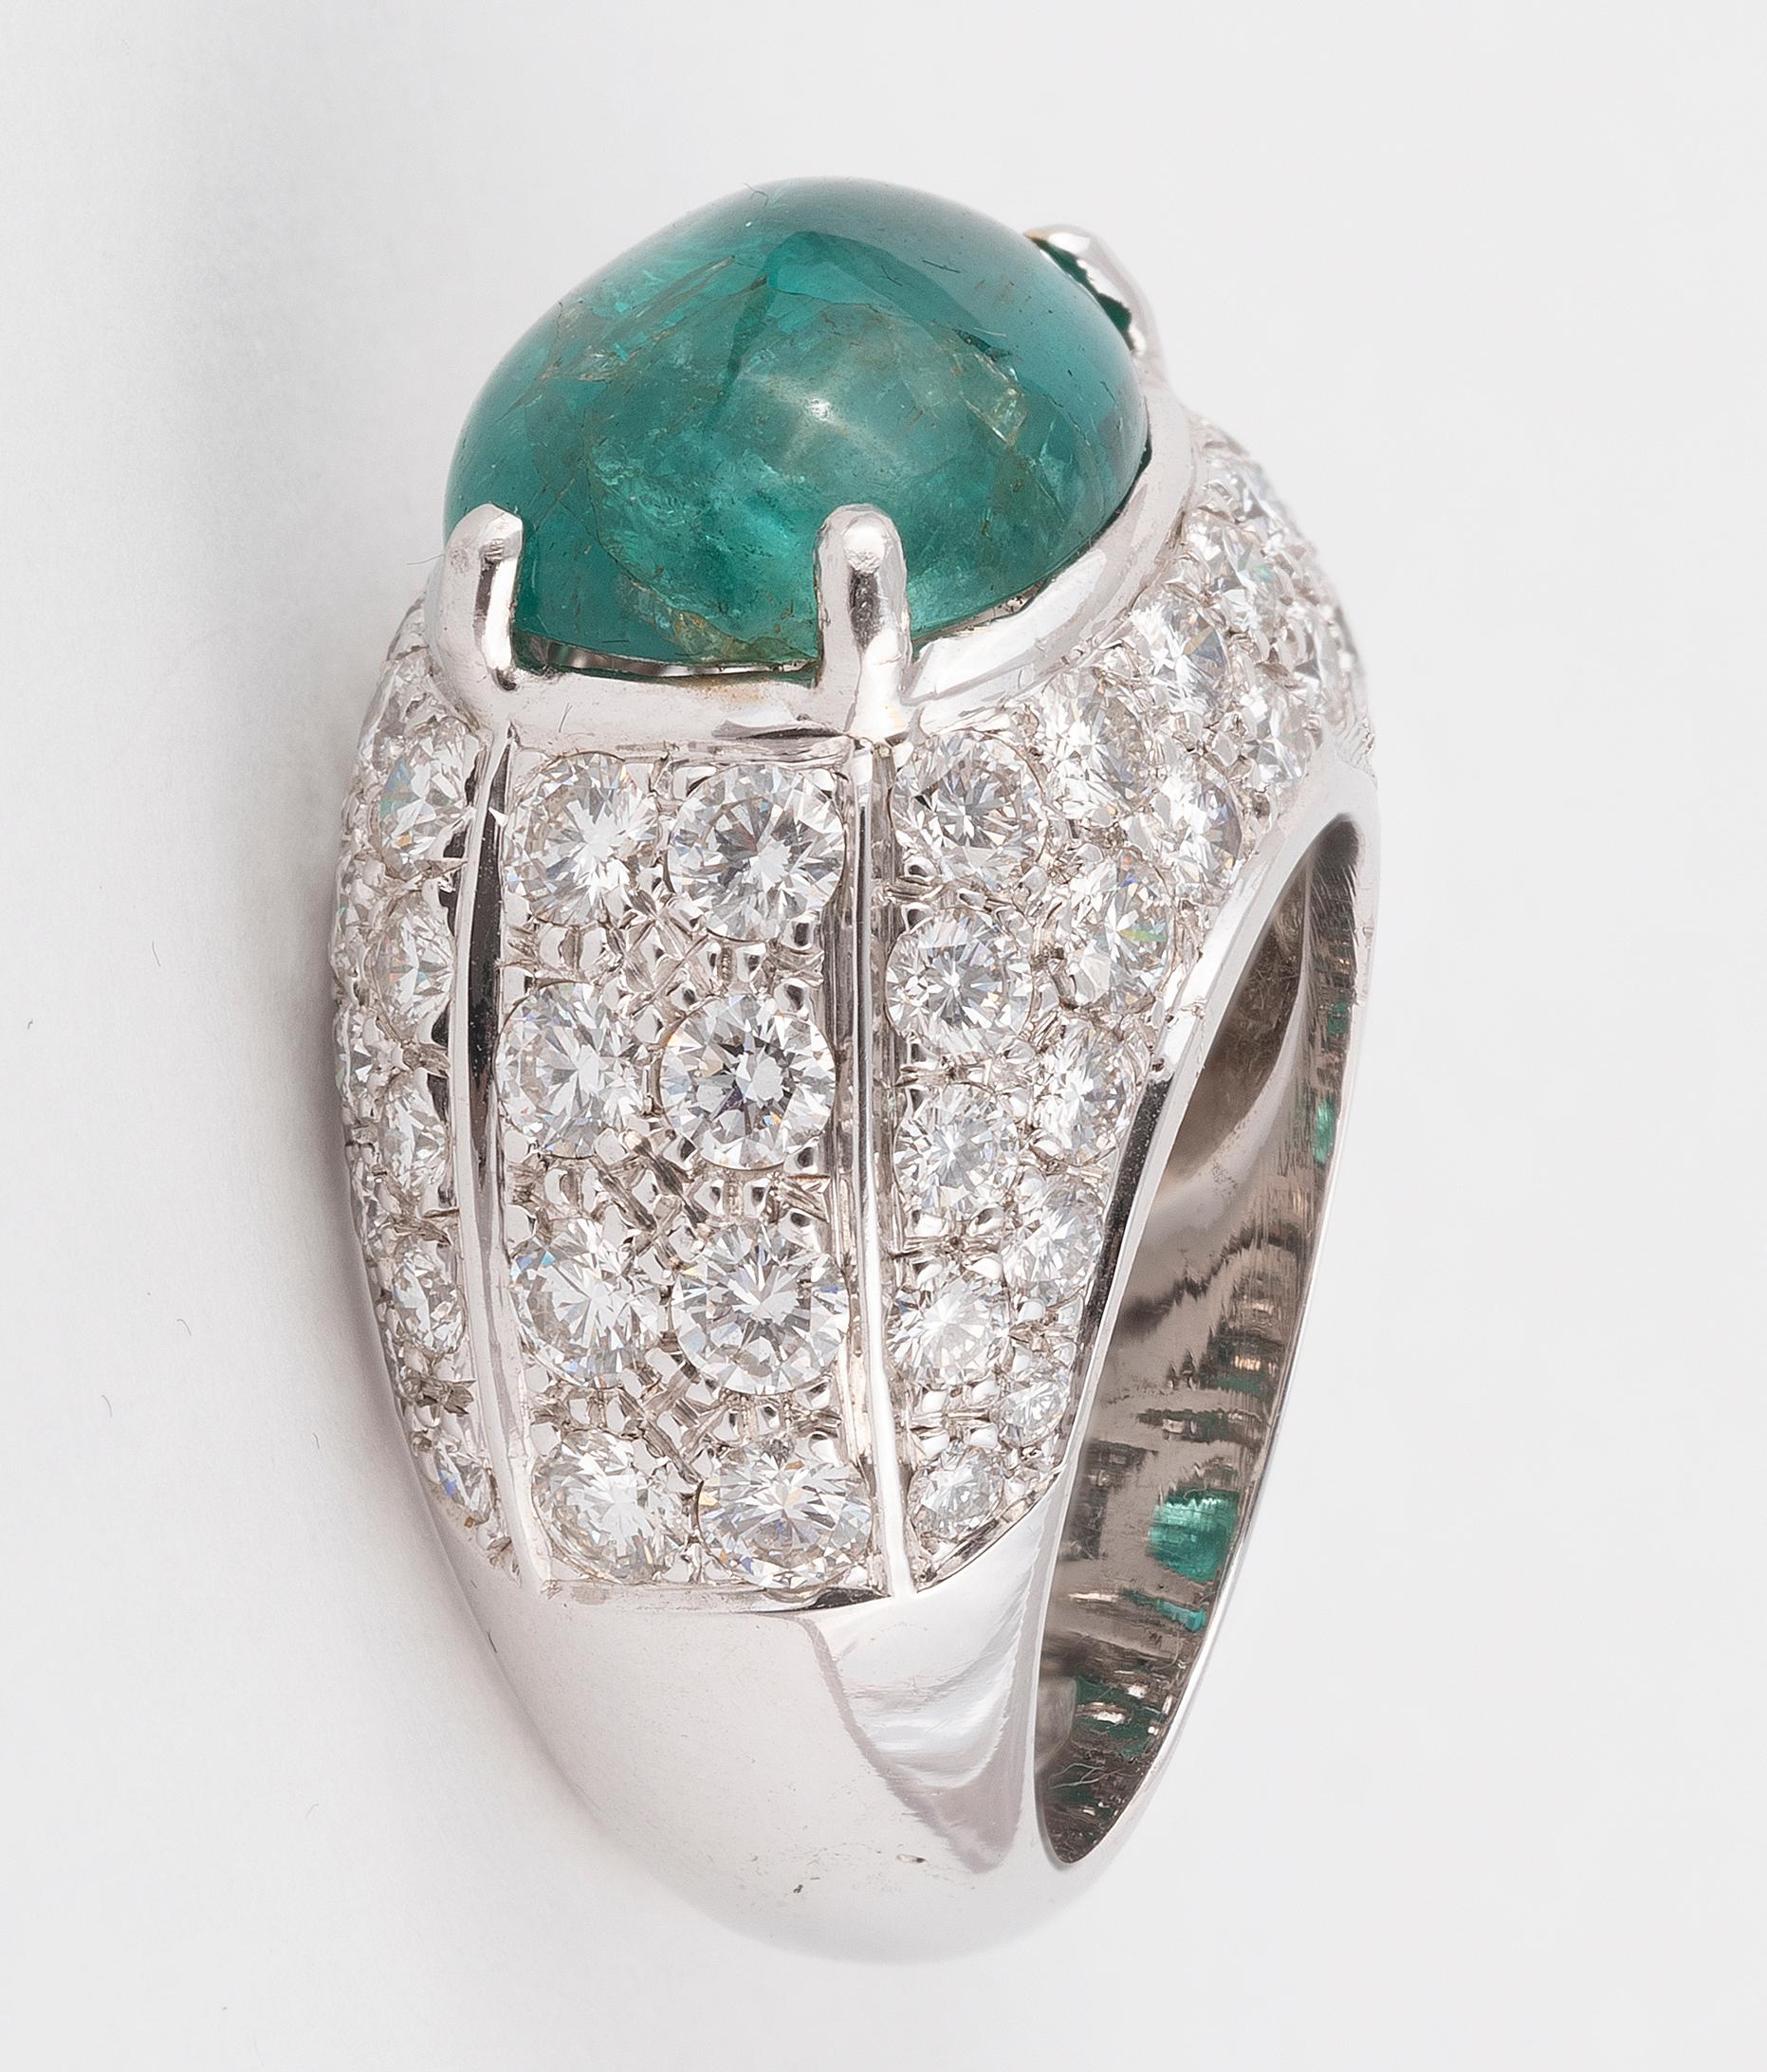 Of bombé design, set with a cabochon emerald weighing approximately 6,5cts, accented by brilliant-cut diamonds approx. 3,50cts, maker's mark, Italy assay mark, ring size 7½